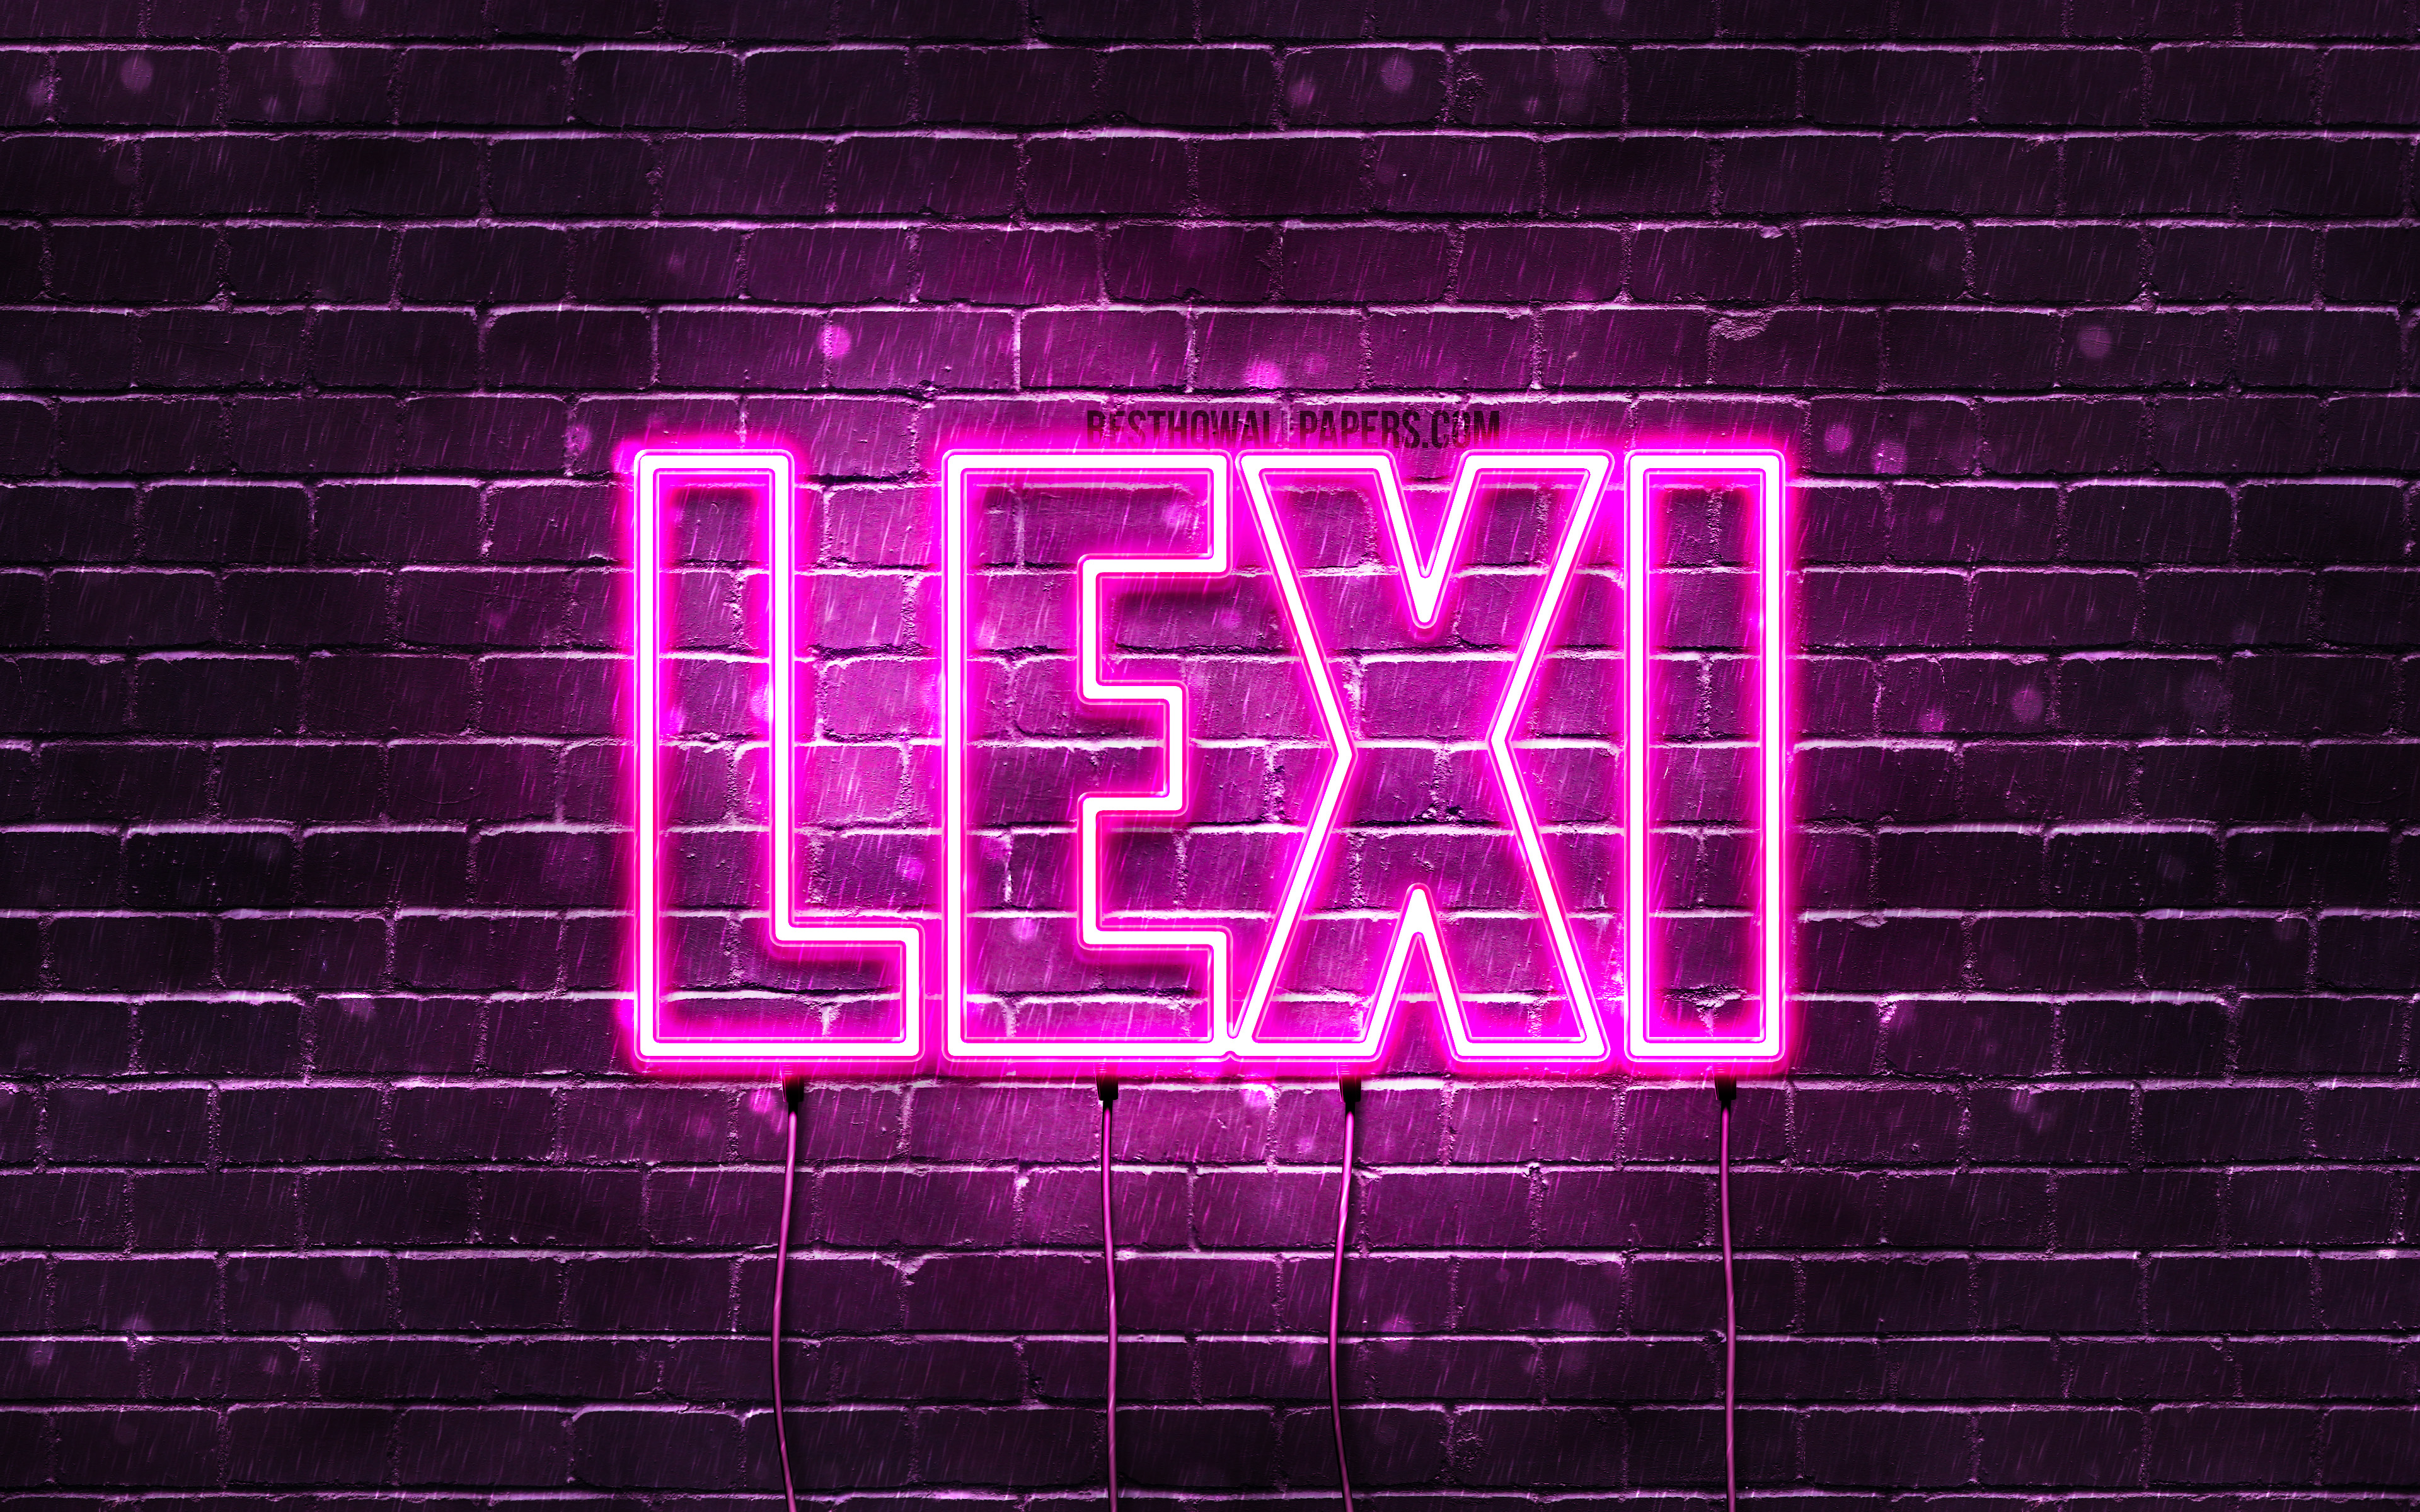 Wallpaper Lexi 4k With Names Female